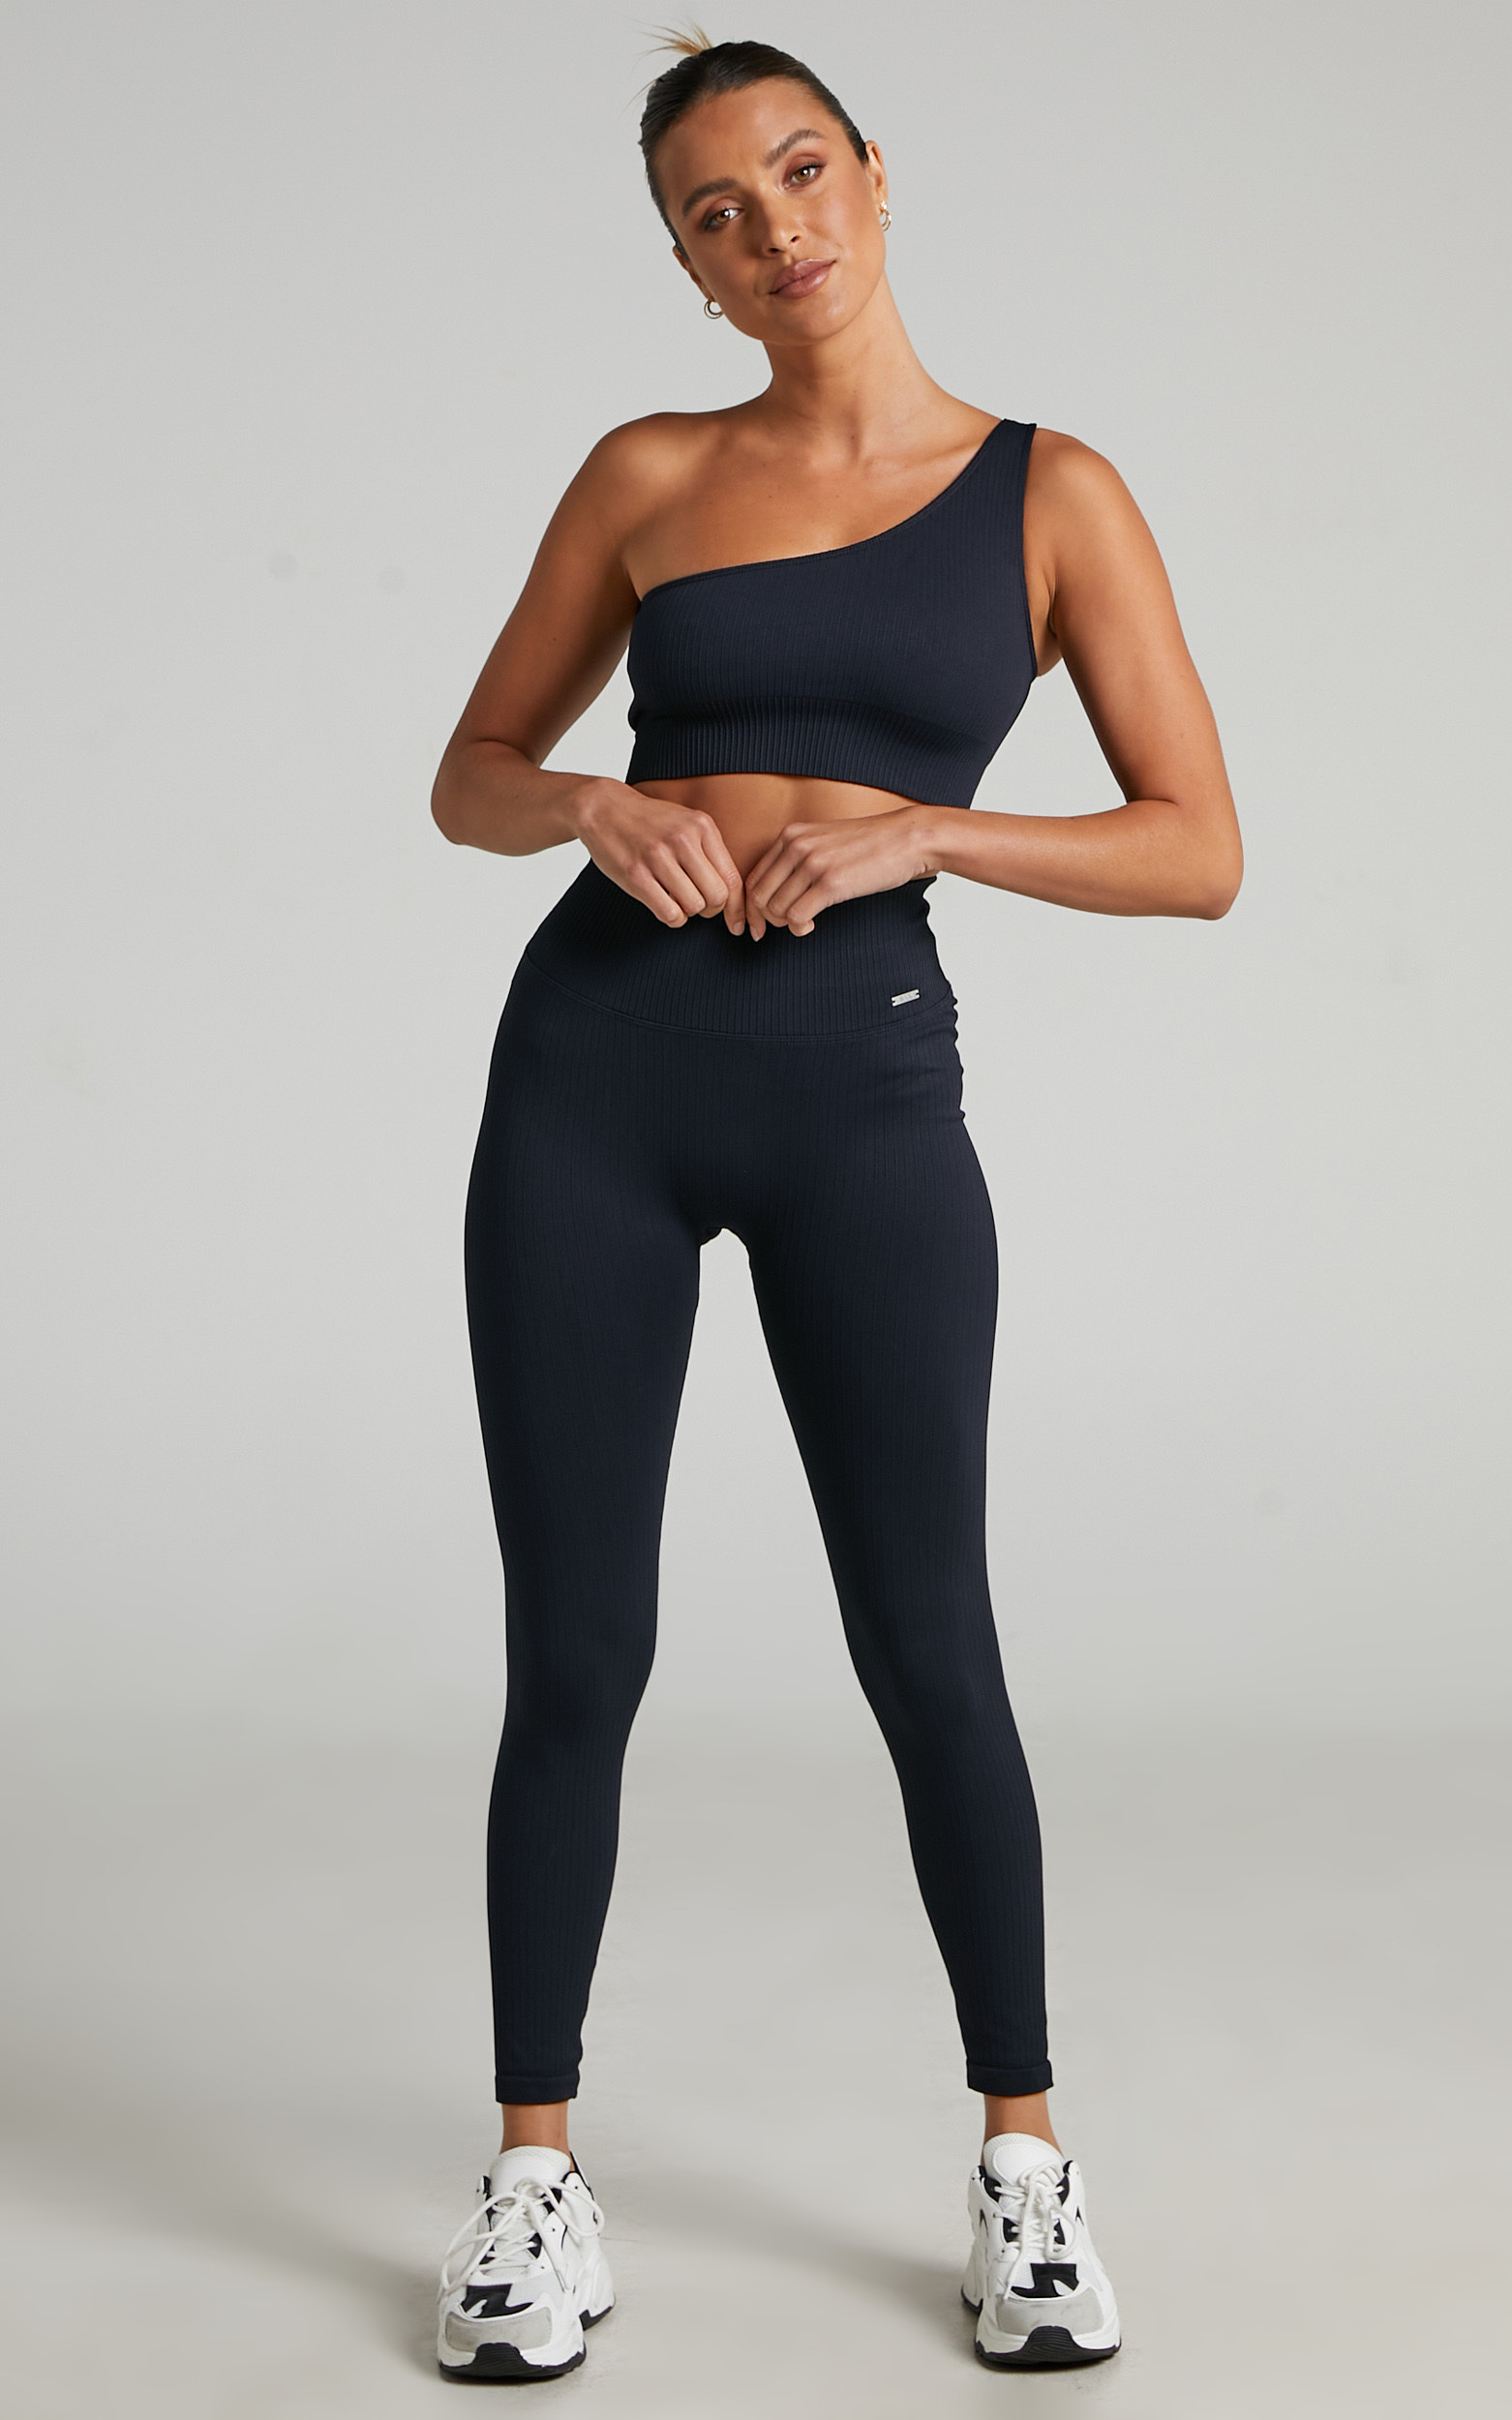 Aim'n - RIBBED SEAMLESS TIGHTS in Black - XS, BLK1, hi-res image number null